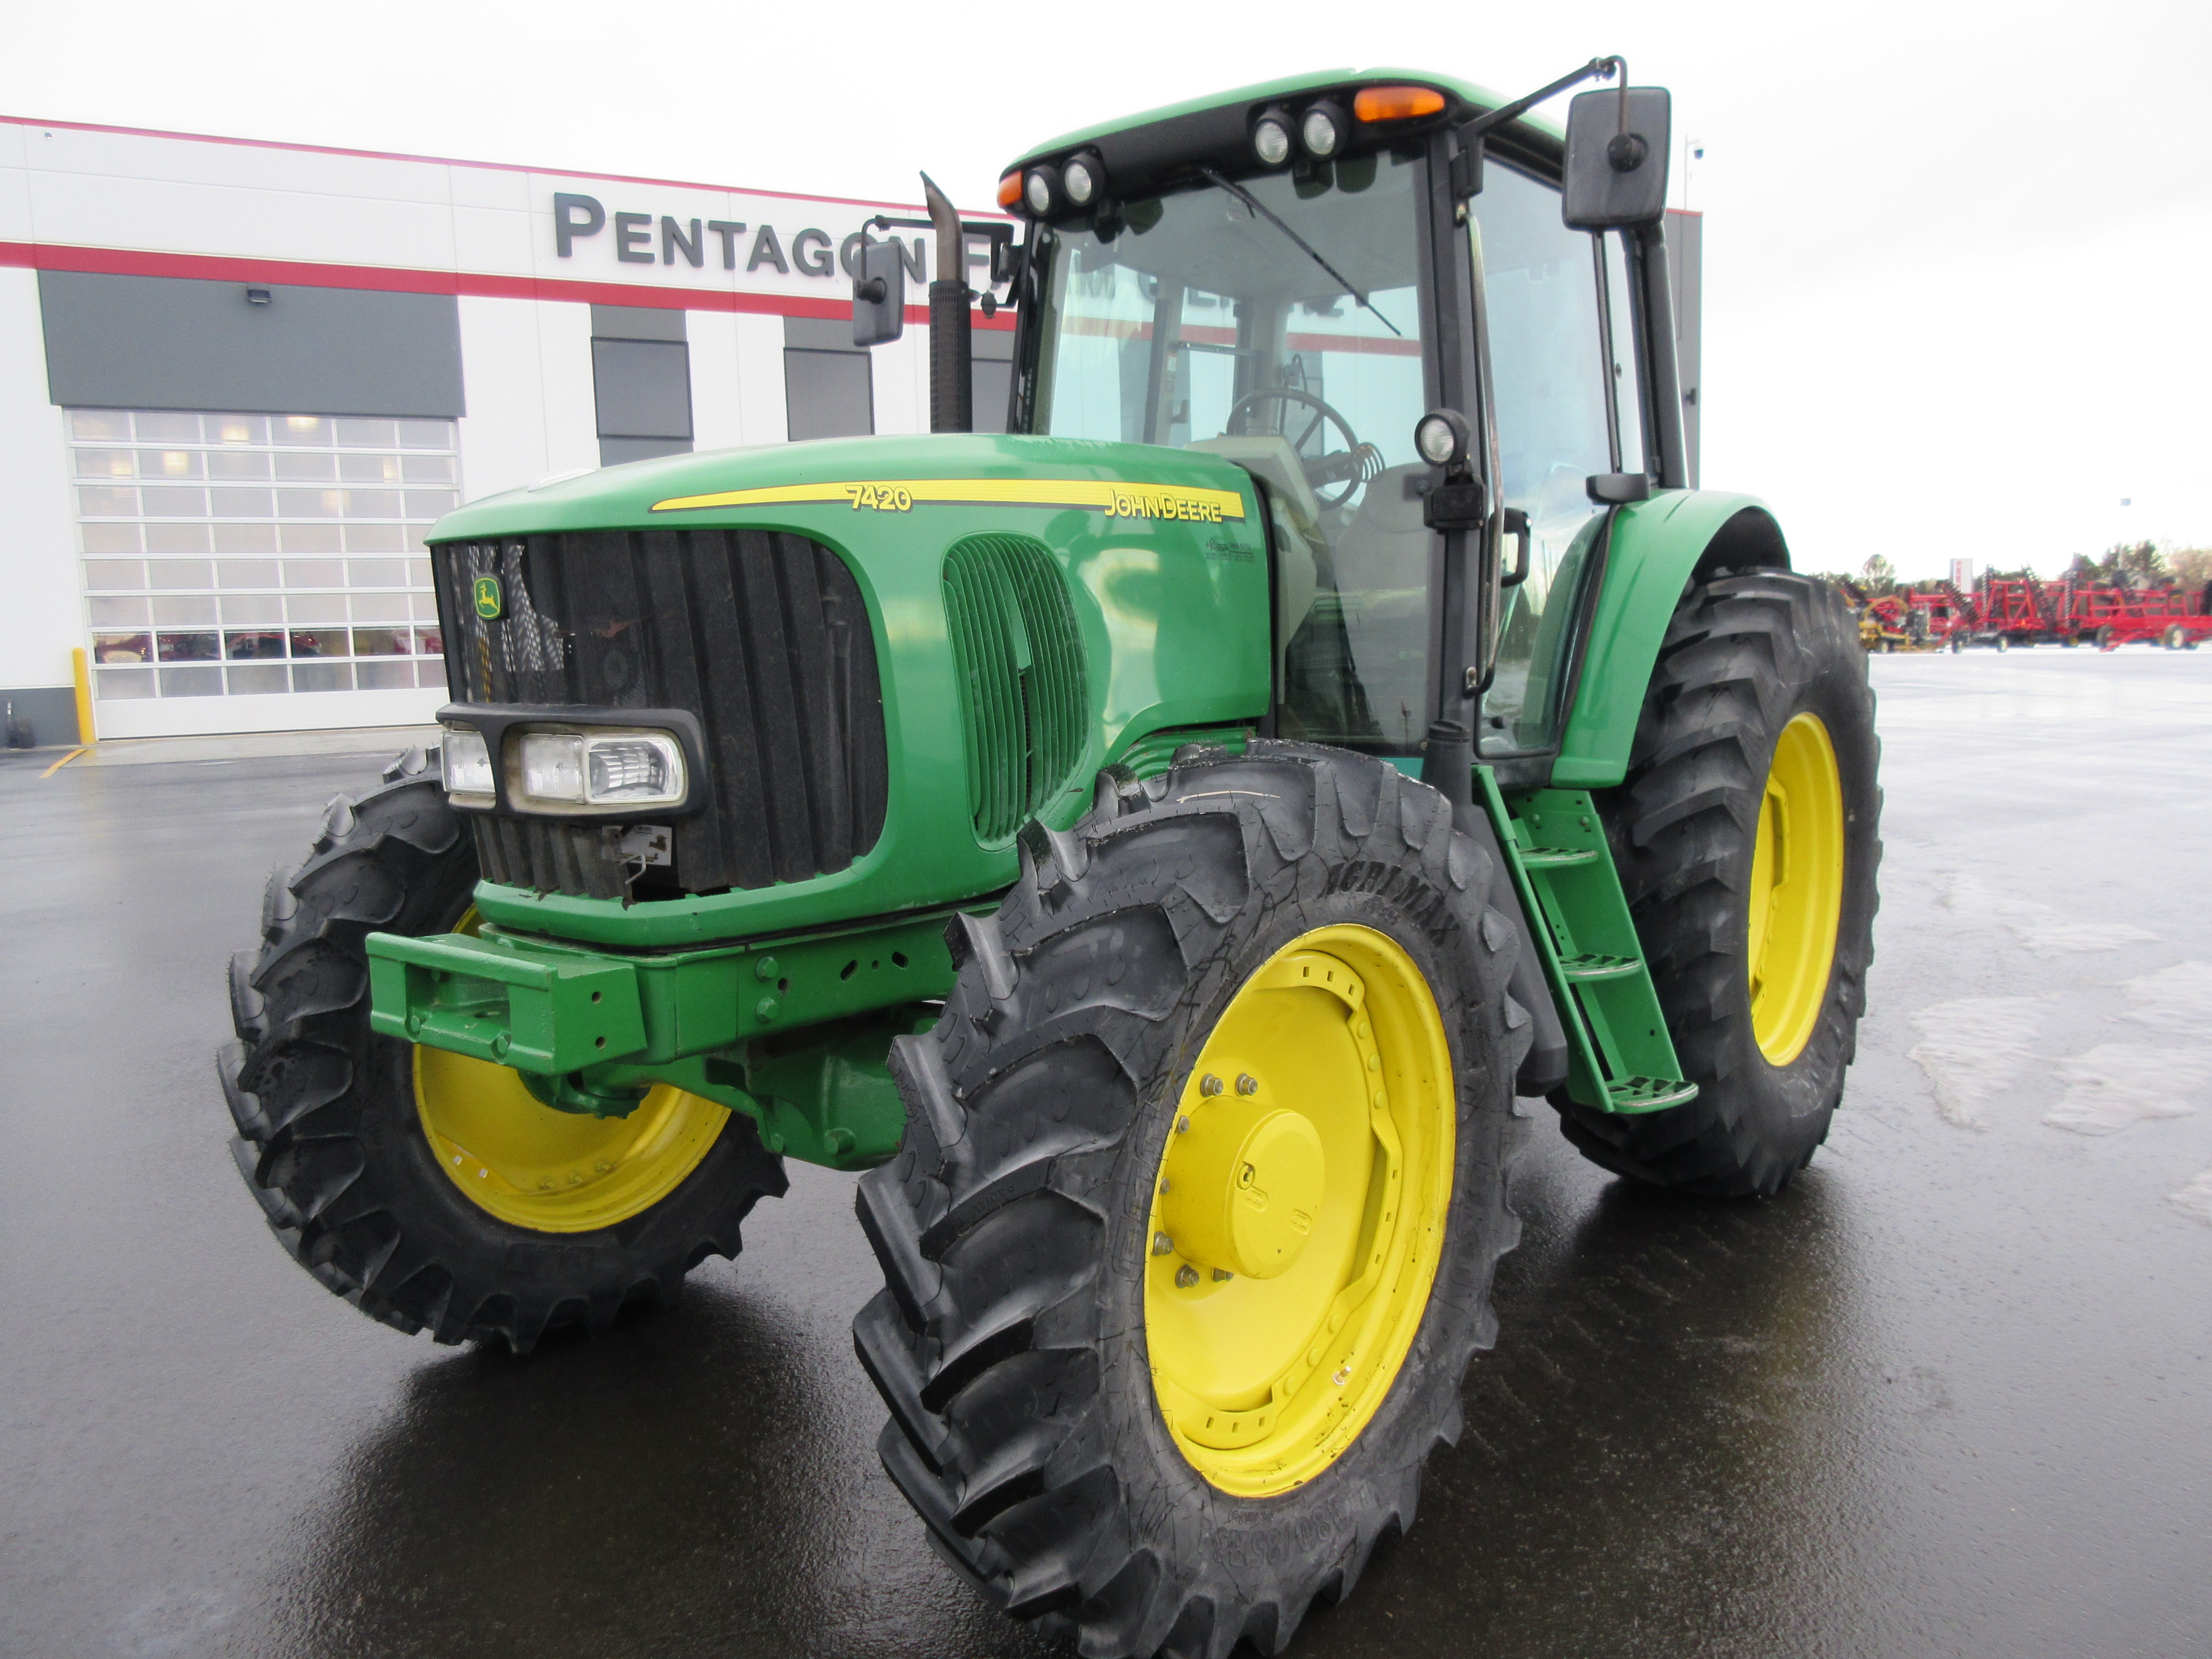 2004 John Deere 7420 Tractor for sale in Lacombe, AB | IronSearch